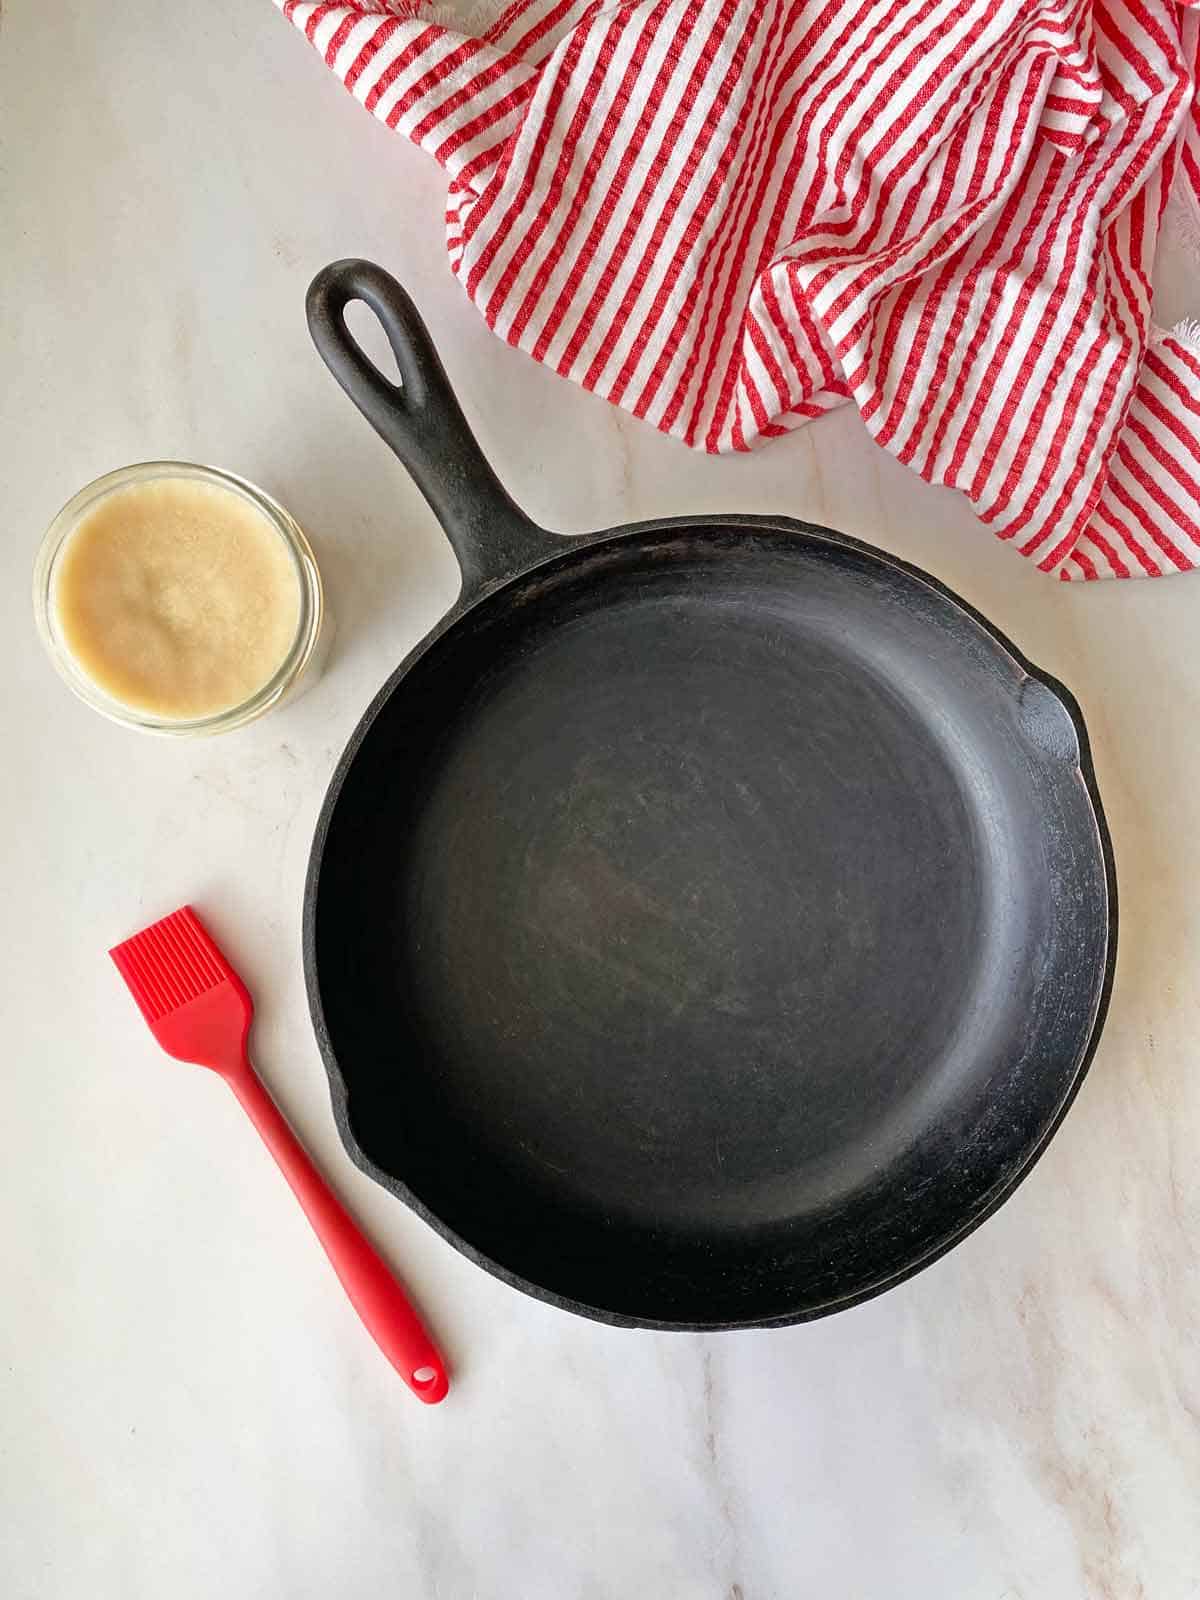 A cast iron pan, a brush, a jar of bacon fat and a red and white towel.